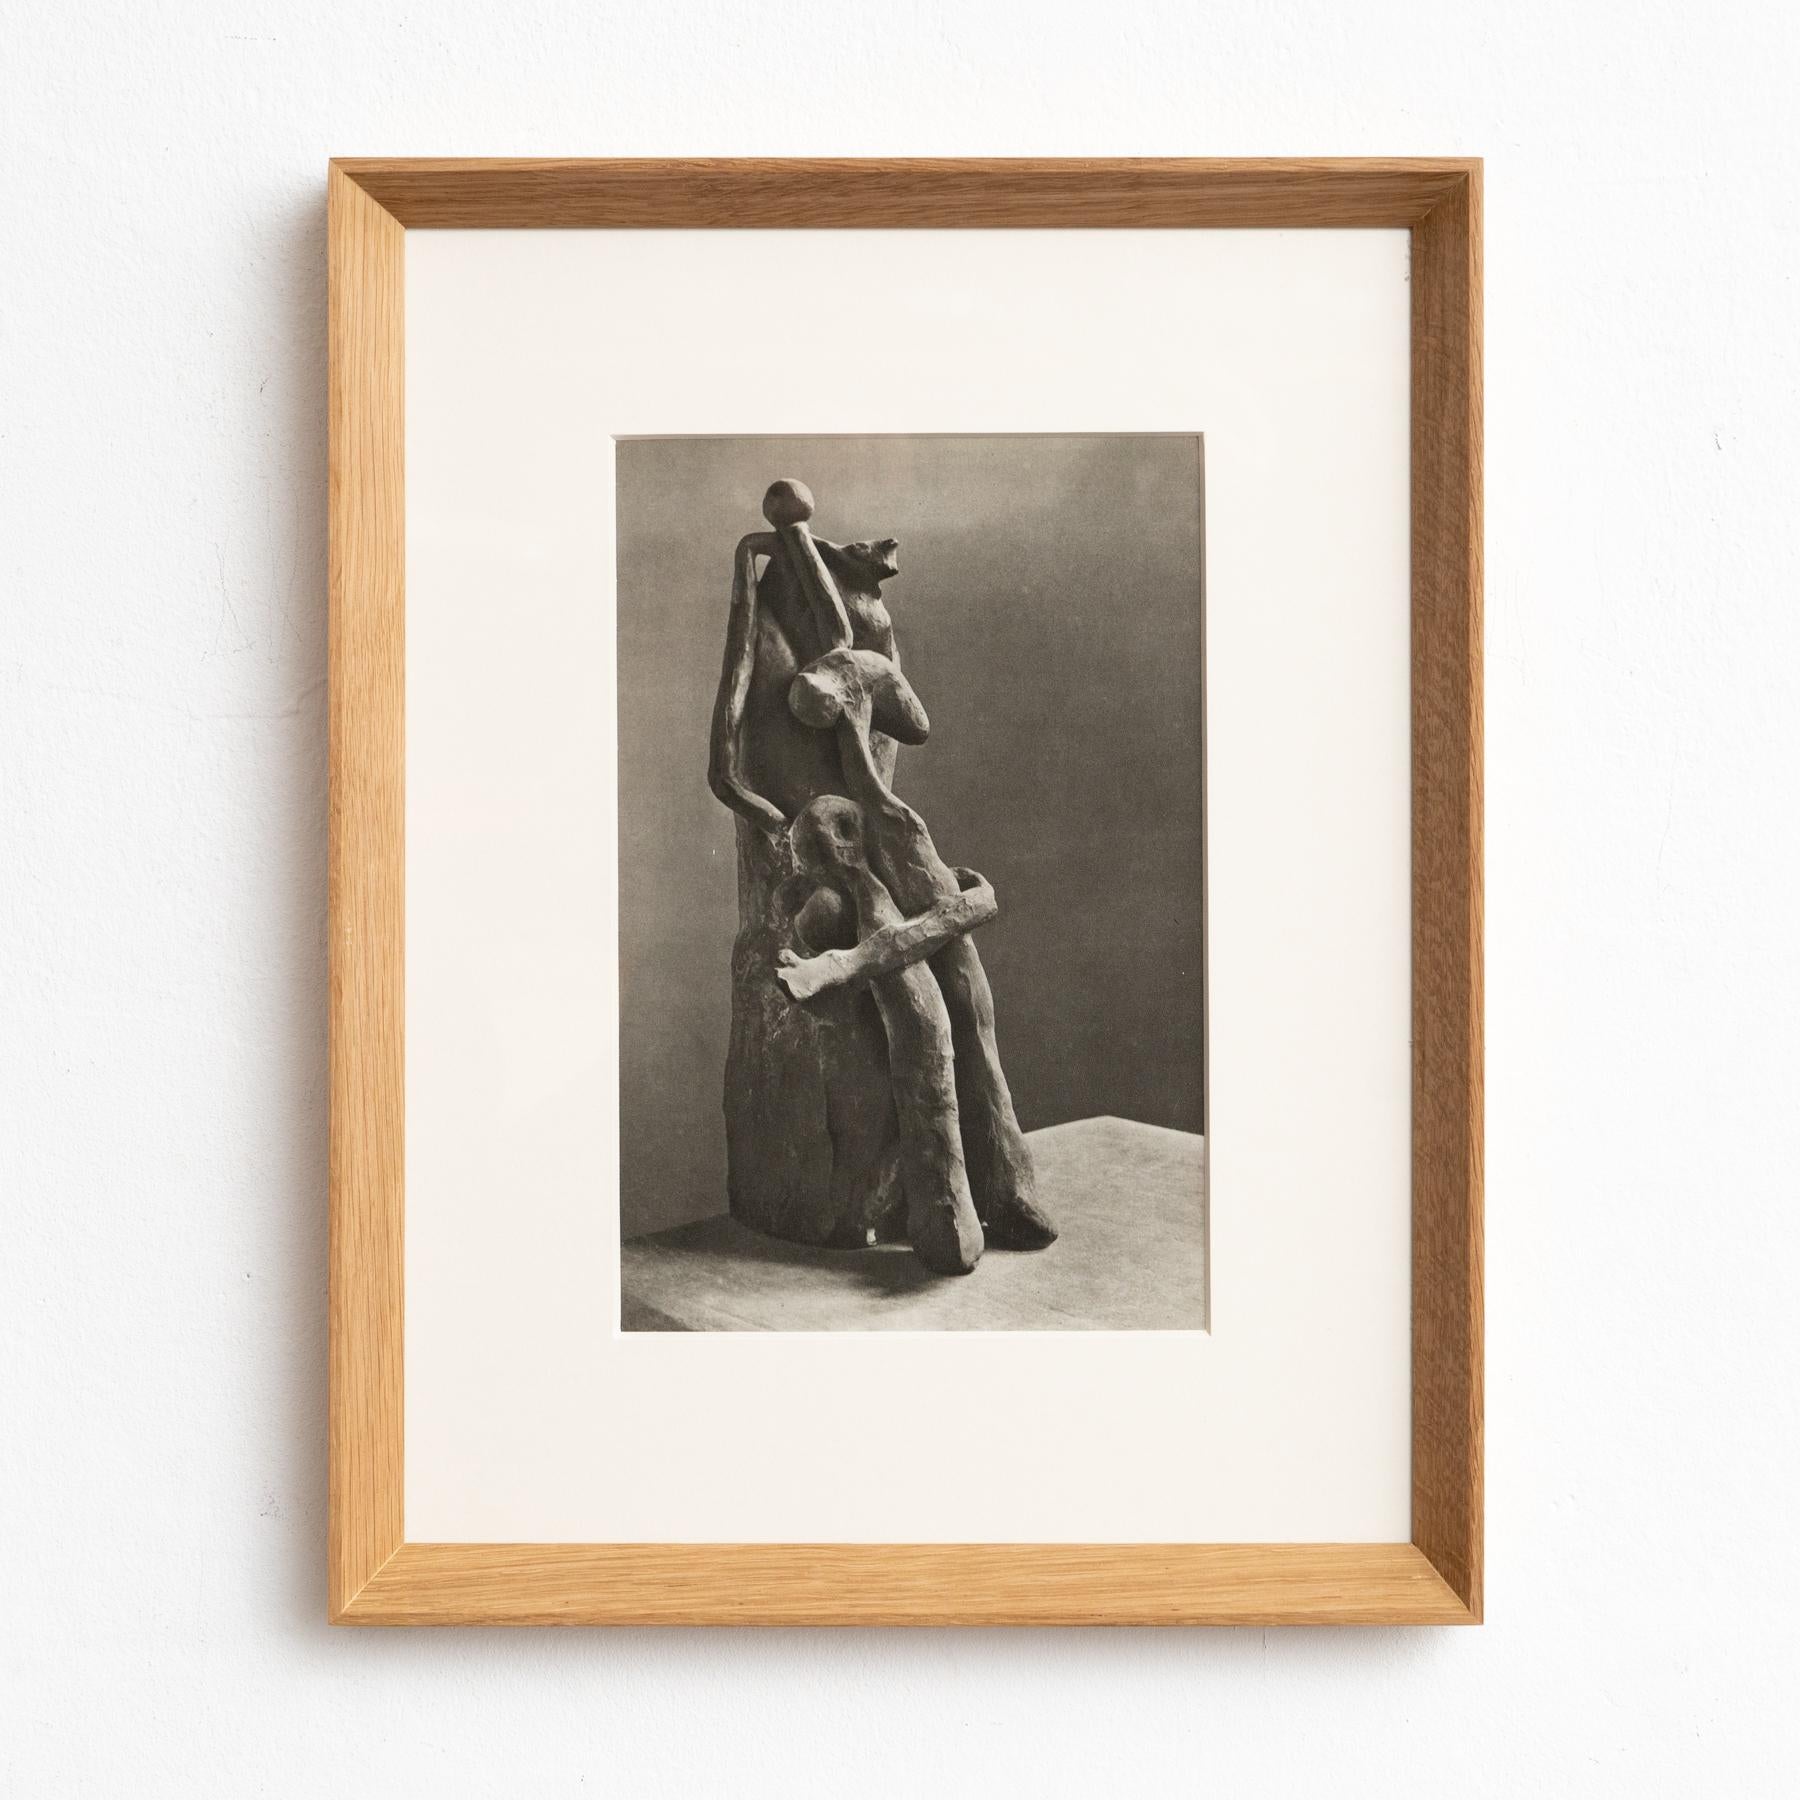 Brassai's Insight: Photogravure of Picasso's Sculpture, circa 1948

From 1948
Photography by Brassai
Photogravure
From 'The Sculptures of Picasso' by Daniel Henry Kahnweiler
Printed by Editions du Chene, France
Framed in natural wood
Dimensions: